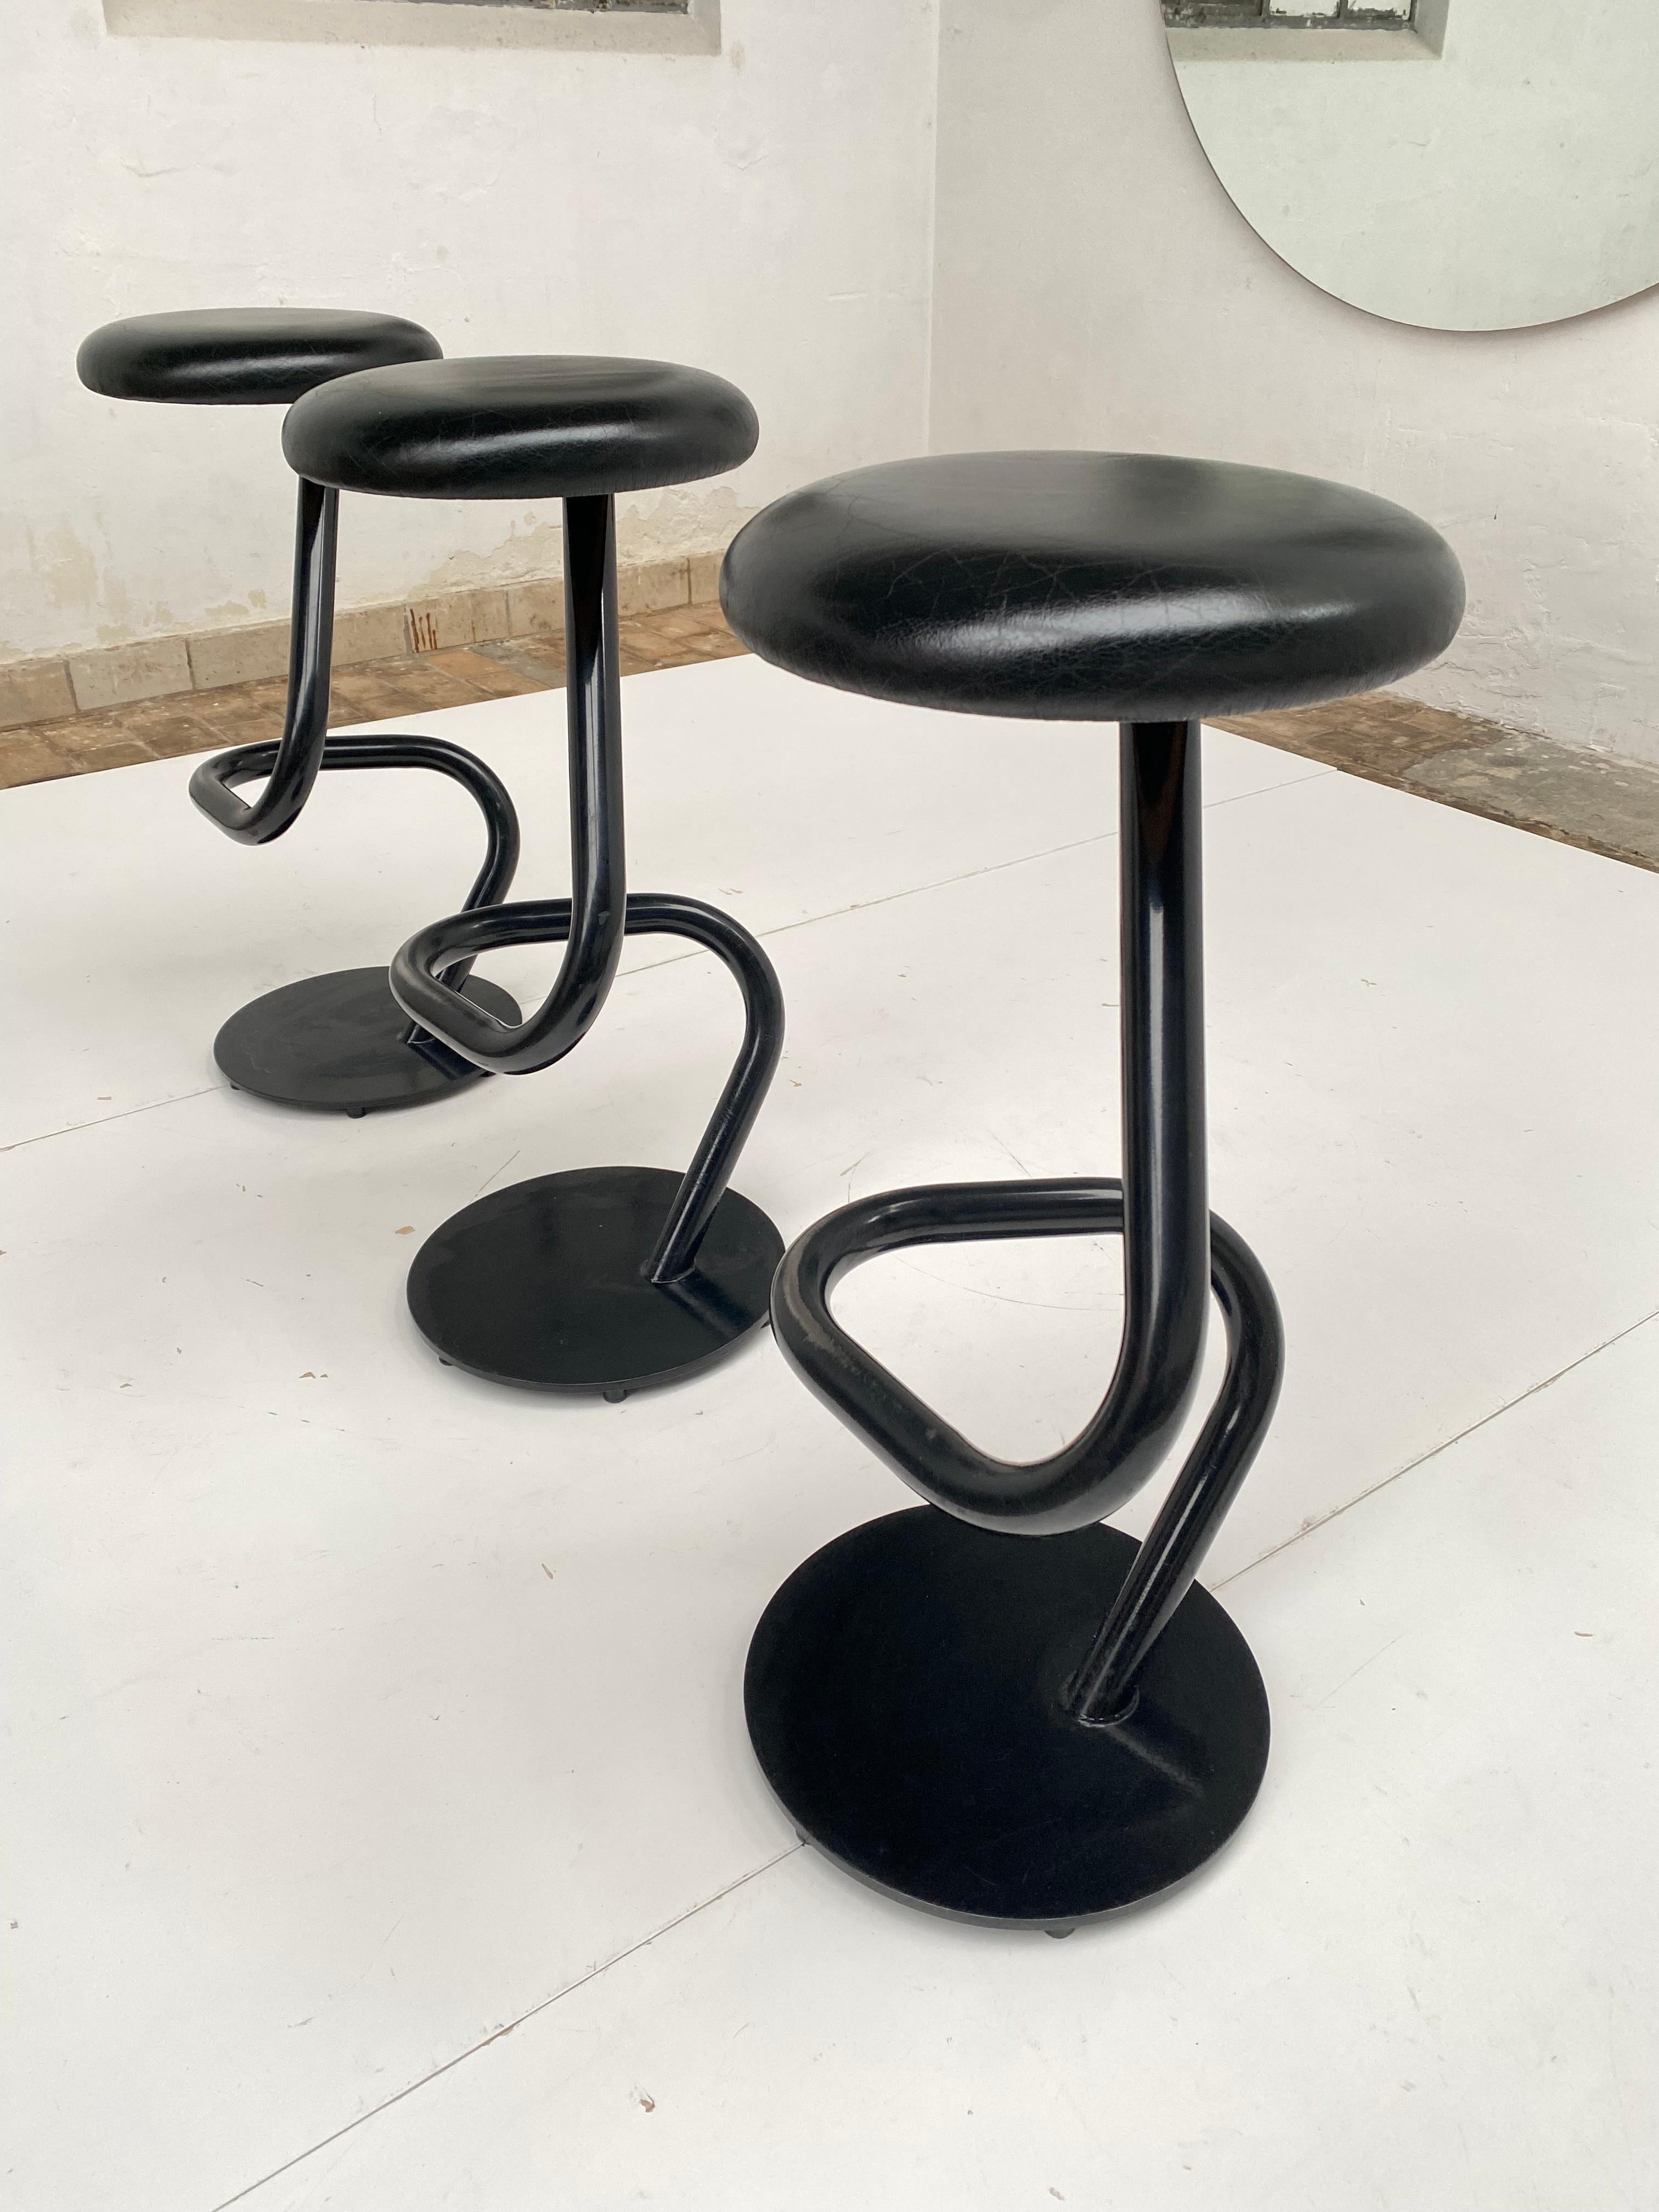 3 Sculptural Swiss post modern bar stools. 

Top quality Swiss Made in the 1980s.

Black Leather seat with a diameter of 34cm (13.38inch) on a heavy black enamelled steel base.

Genius and simple design with comfortable foot rest function on 2